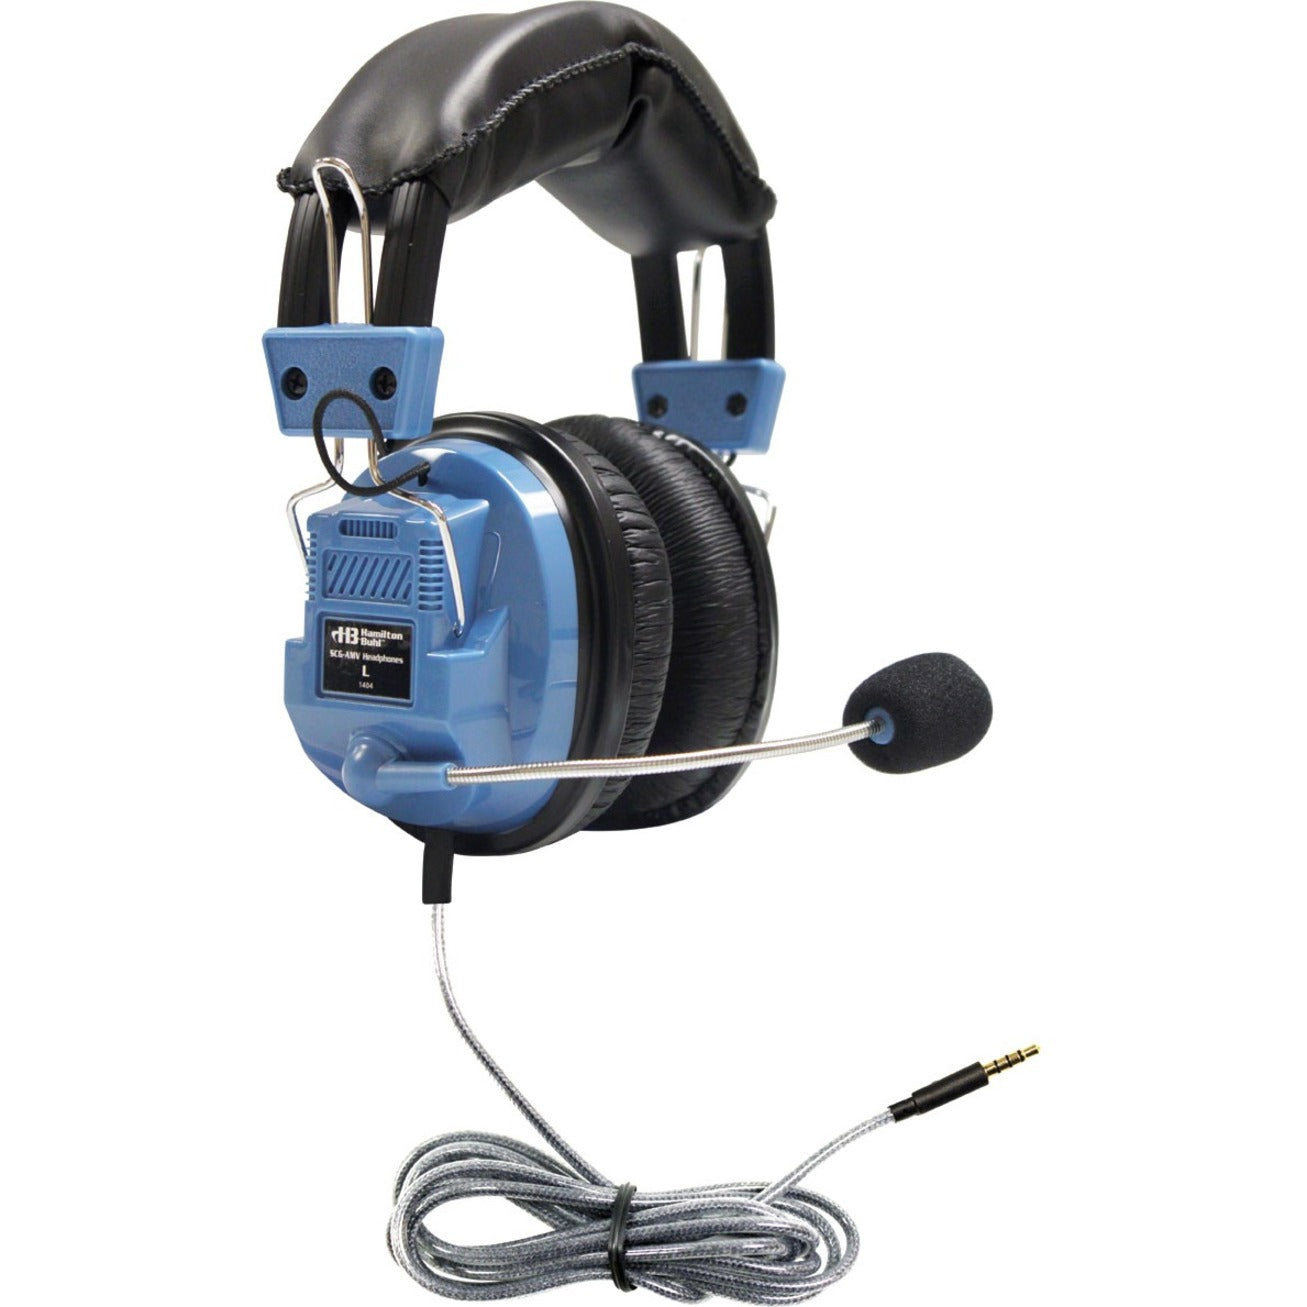 Ergoguys SCG-AMV Deluxe Headset with Gooseneck Microphone and TRRS Plug, Over-the-head, Light Blue, Padded Headband, Washable, Swivel Mechanism